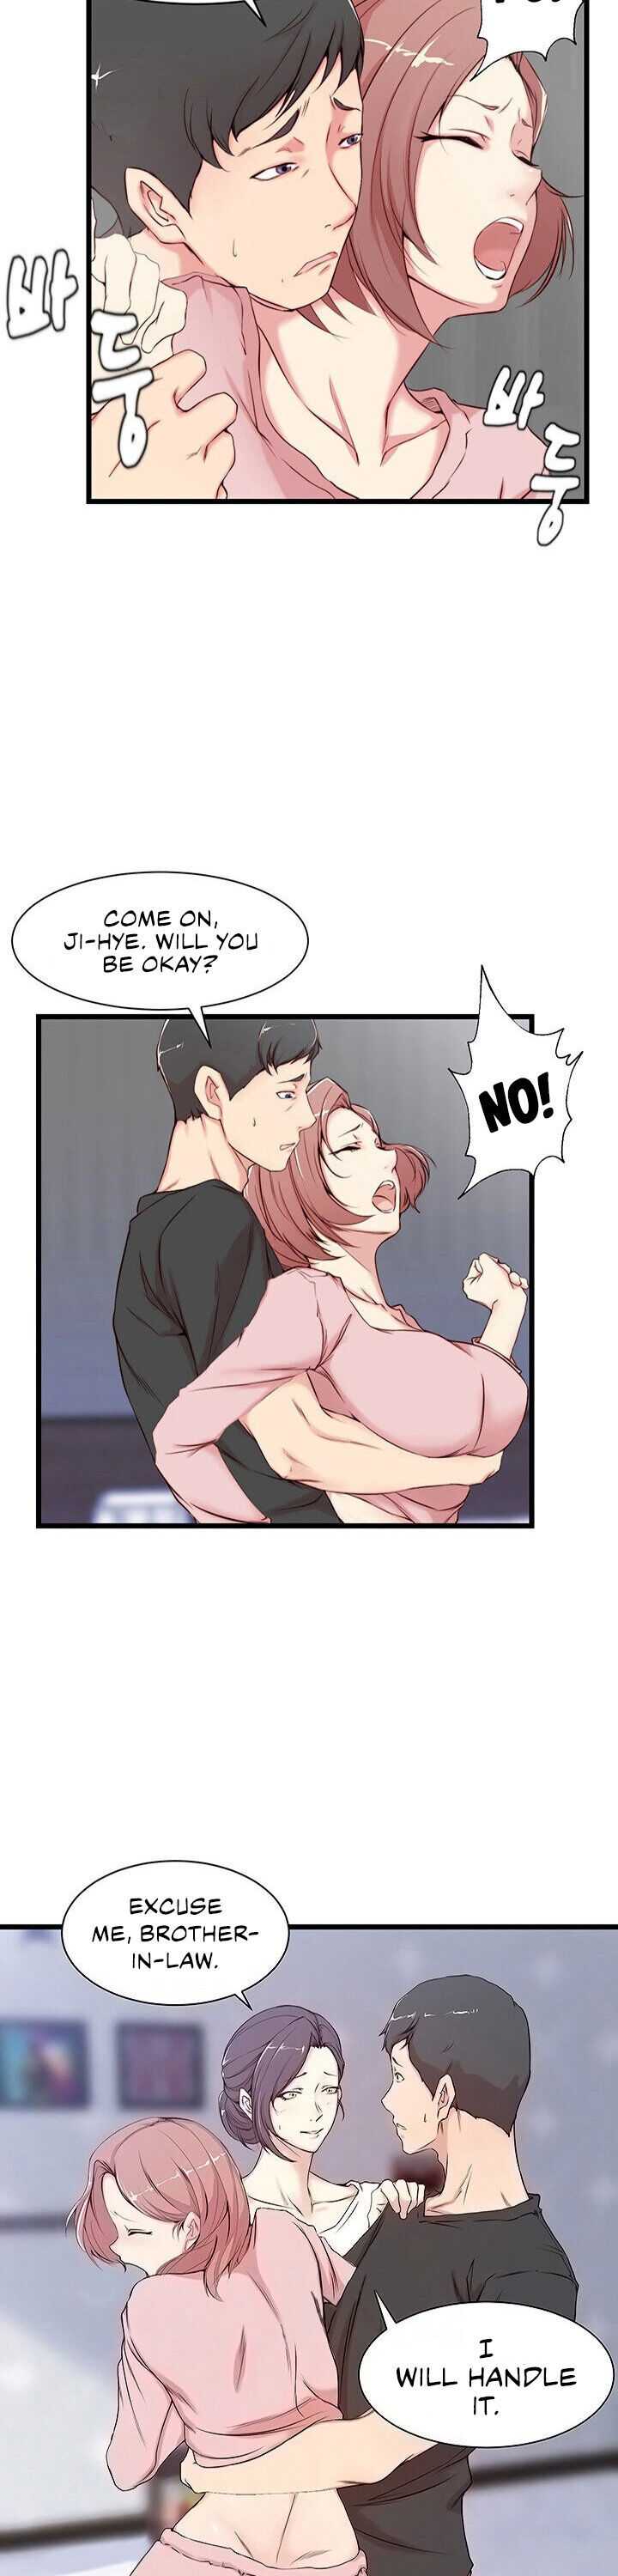 Sister-in-Law Manhwa - Chapter 2 Page 4